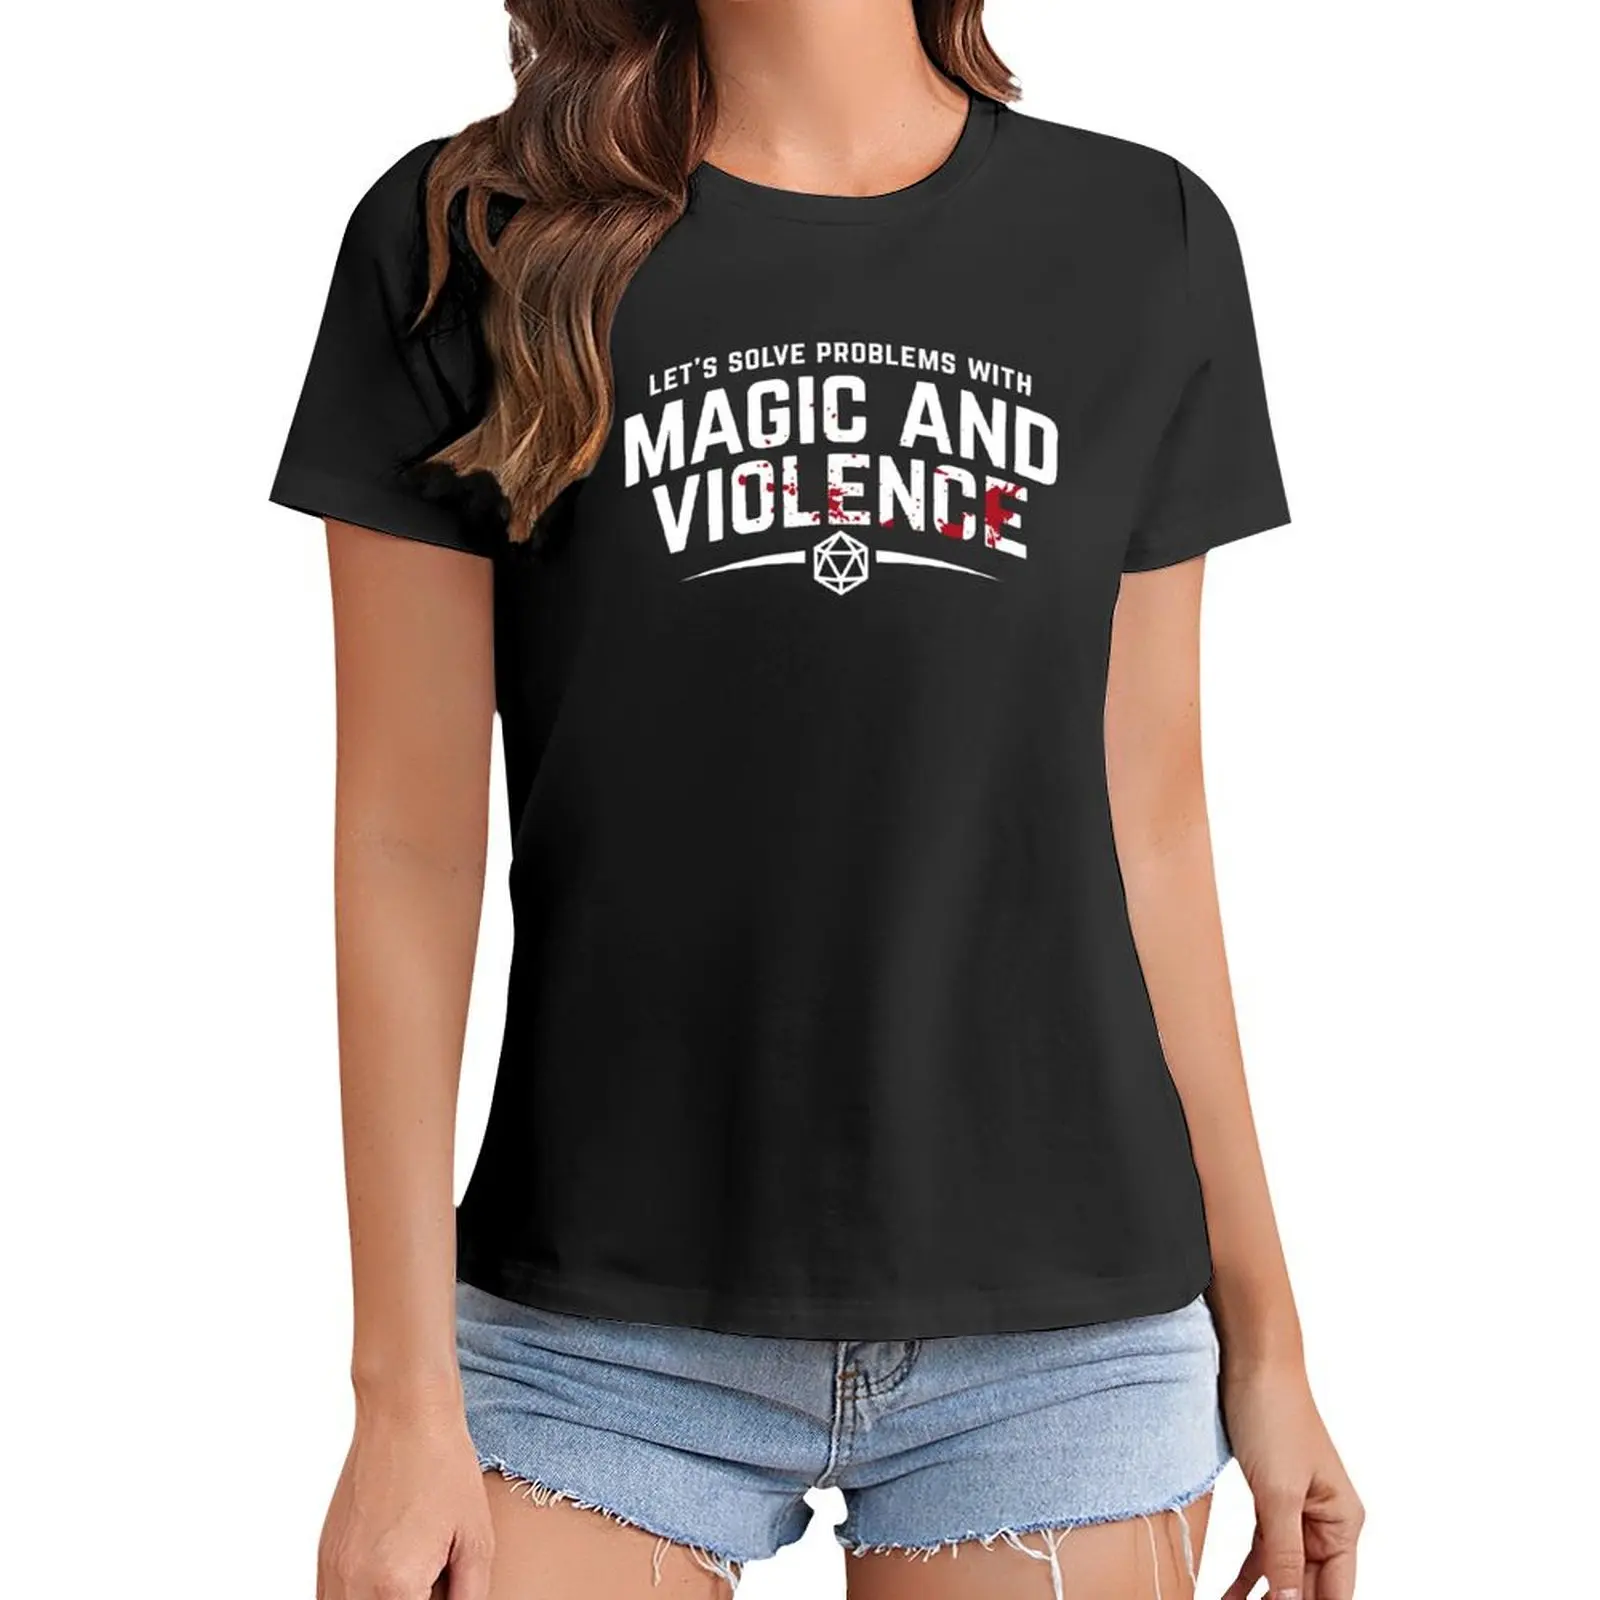 

Let's Solve Problems With Magic and Violence - Funny DnD Gaming T-Shirt cute clothes plus sizes Woman T-shirts